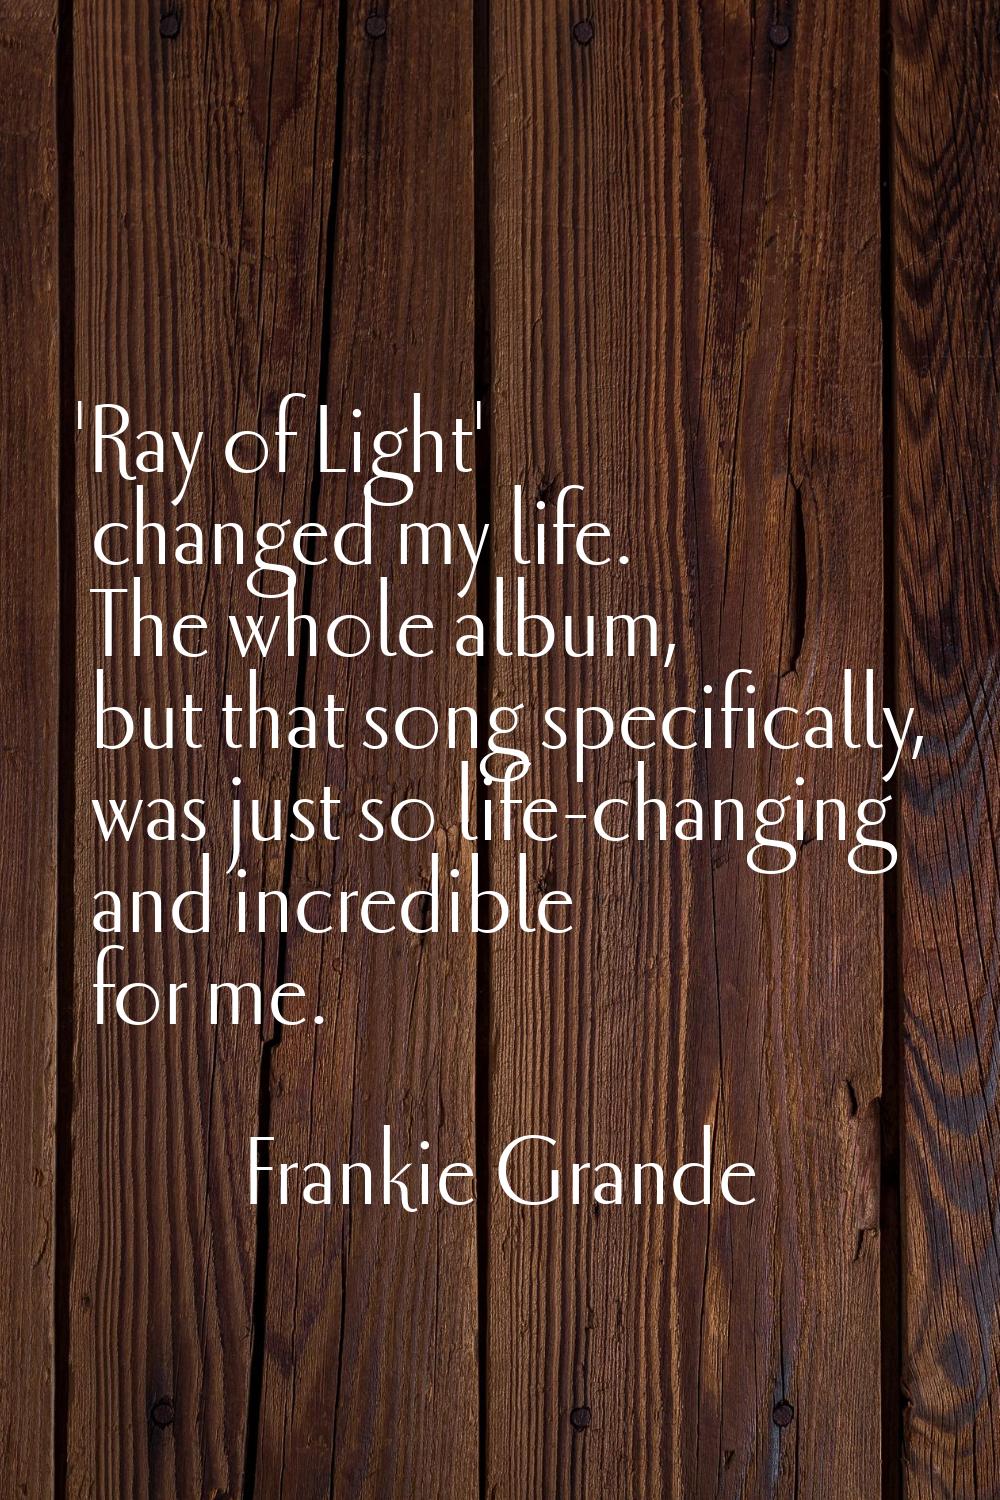 'Ray of Light' changed my life. The whole album, but that song specifically, was just so life-chang